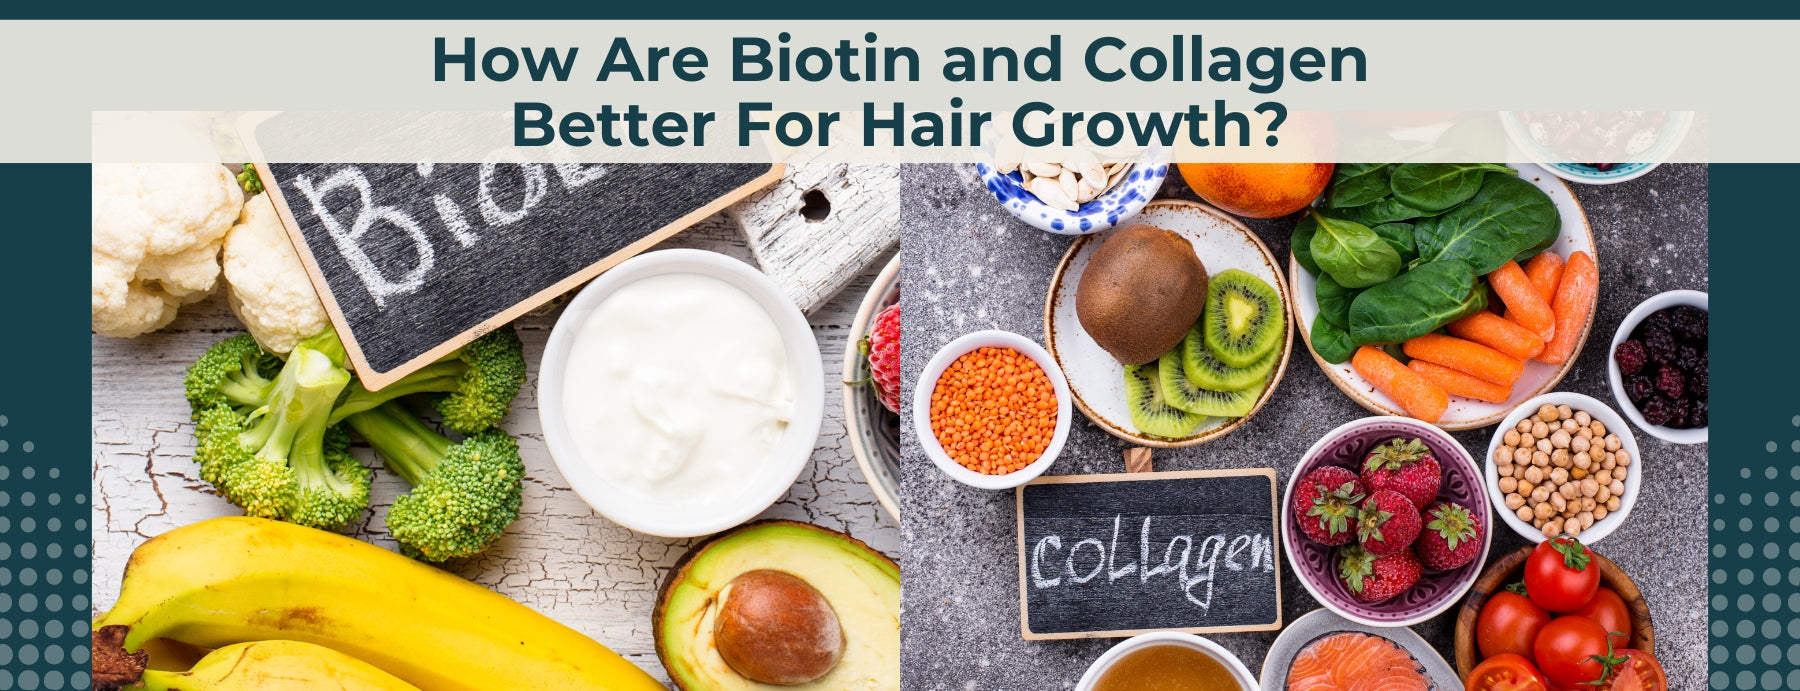 How Are Biotin and Collagen Better For Hair Growth?